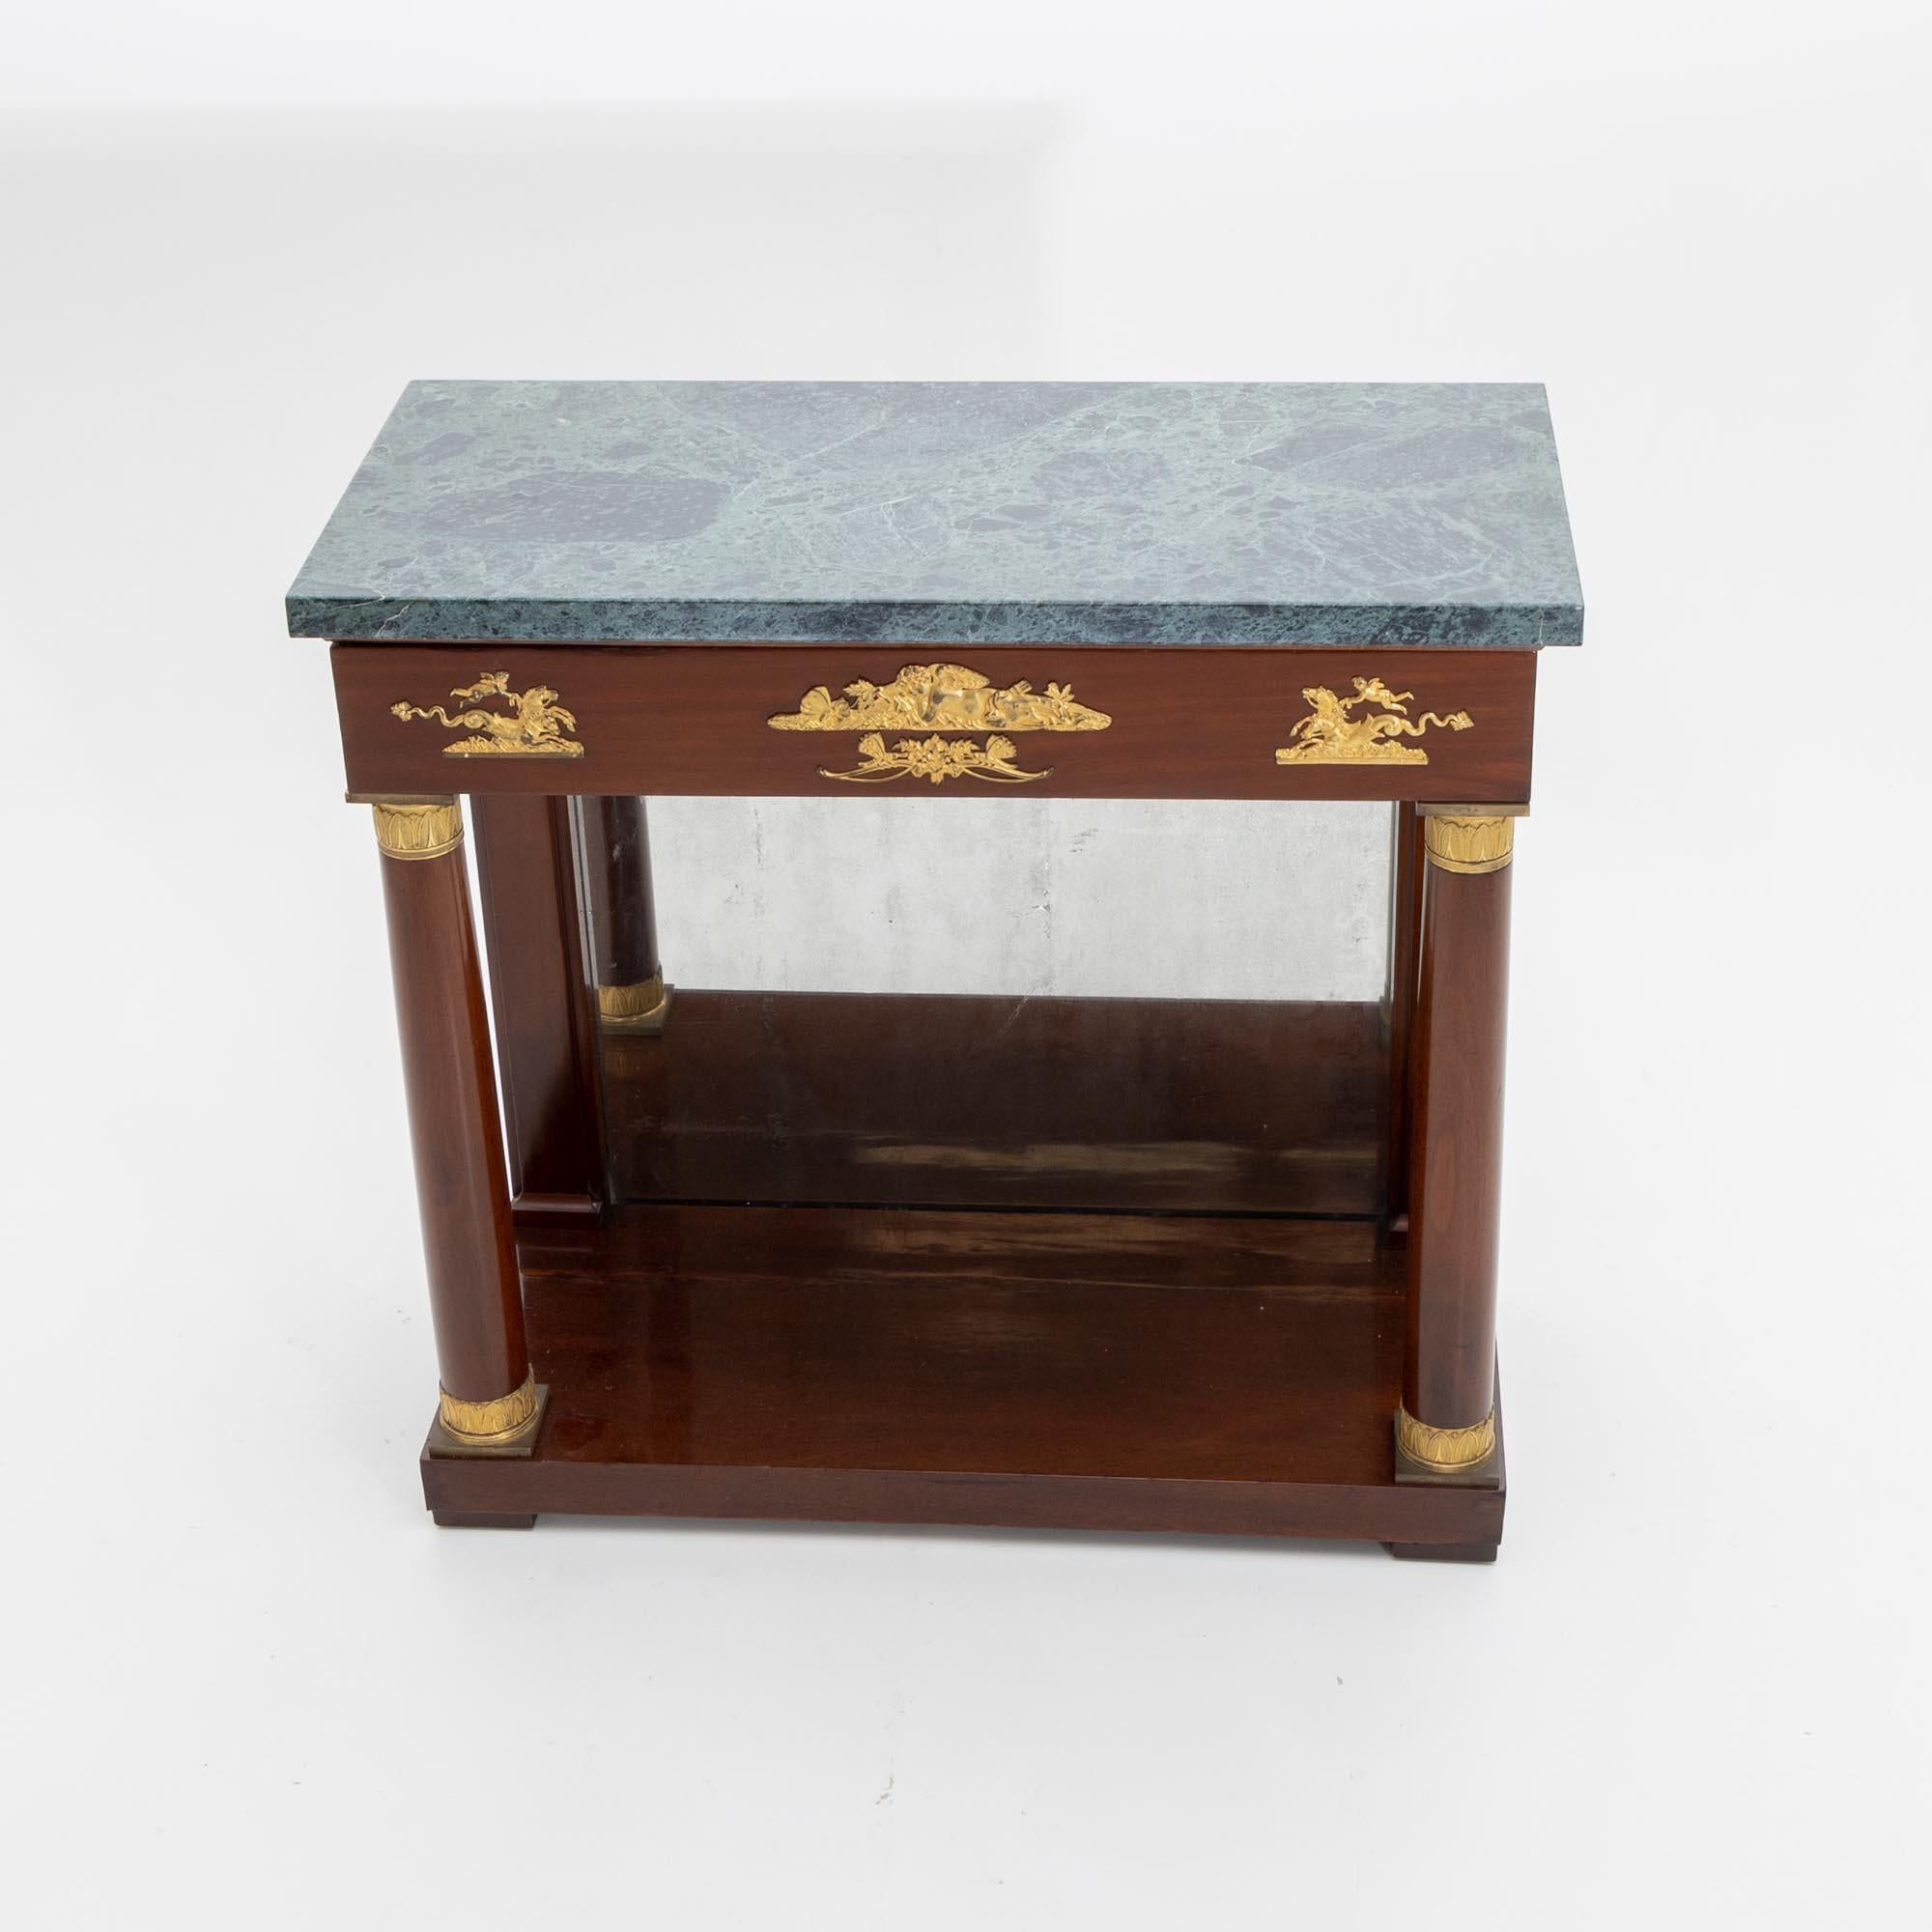 Marble Empire Wall Console, Early 19th Century